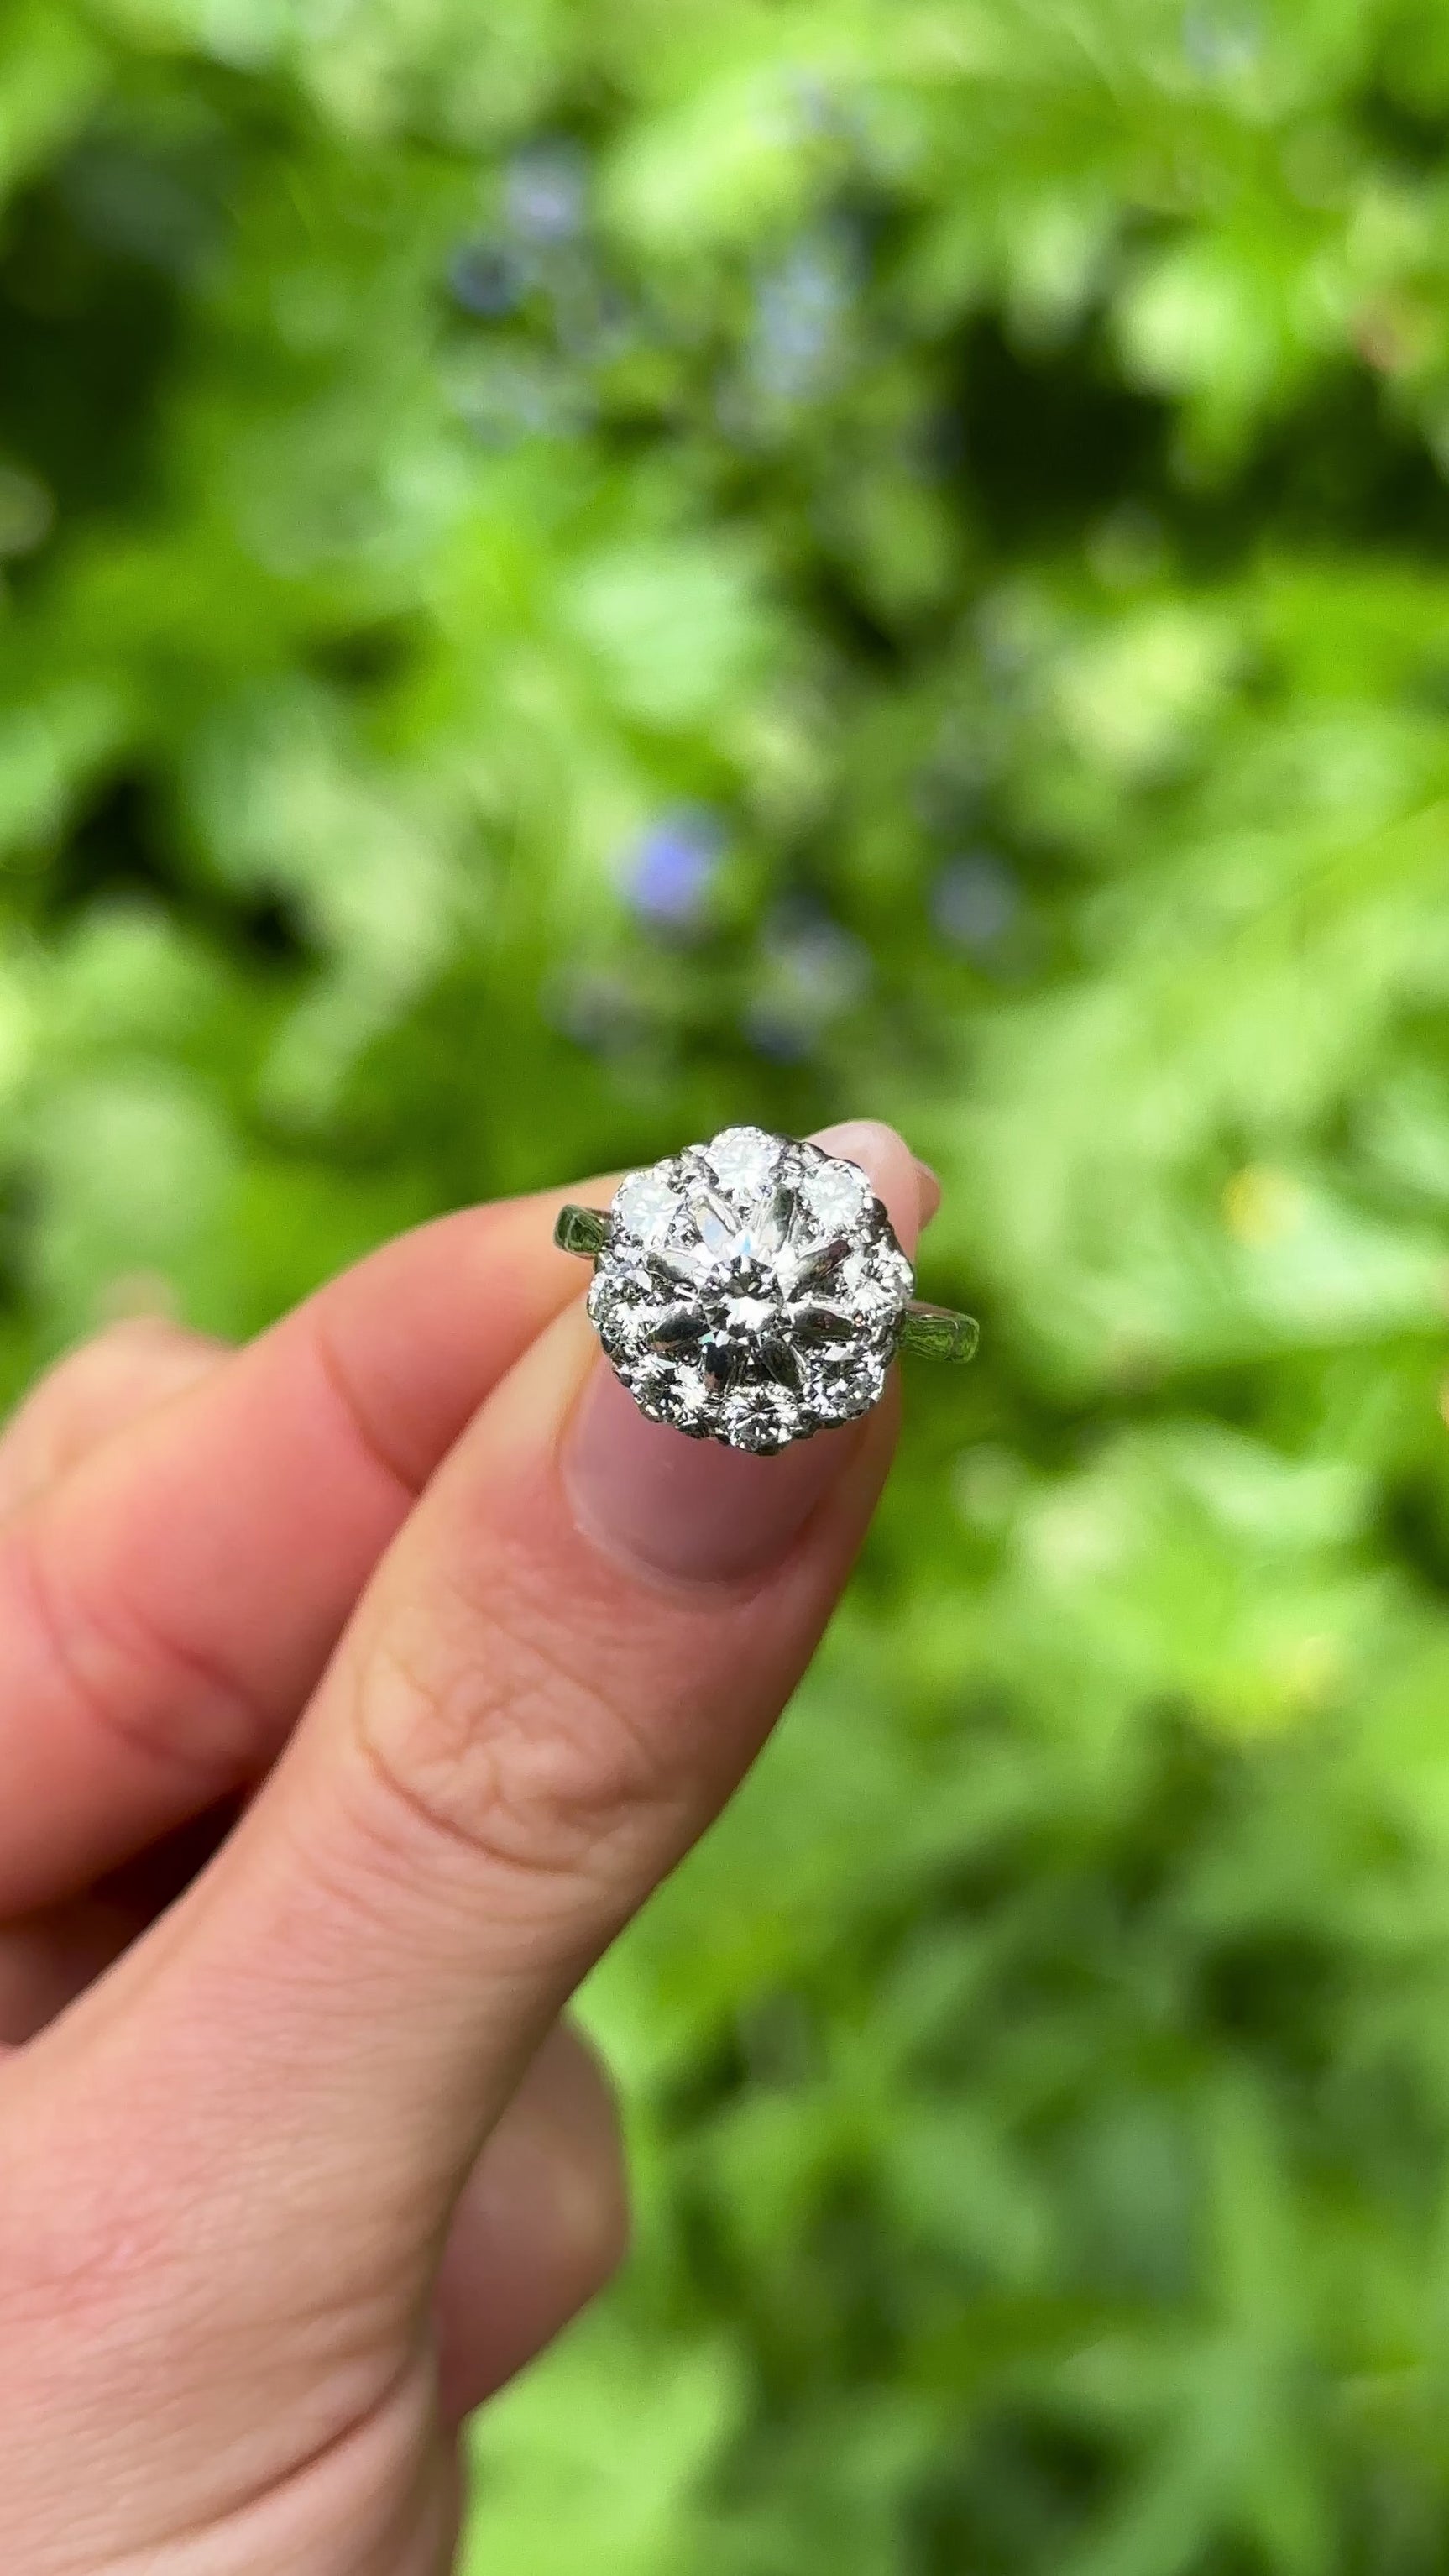 Vintage, Diamond Cluster Engagement Ring, 18ct White Gold held in fingers.